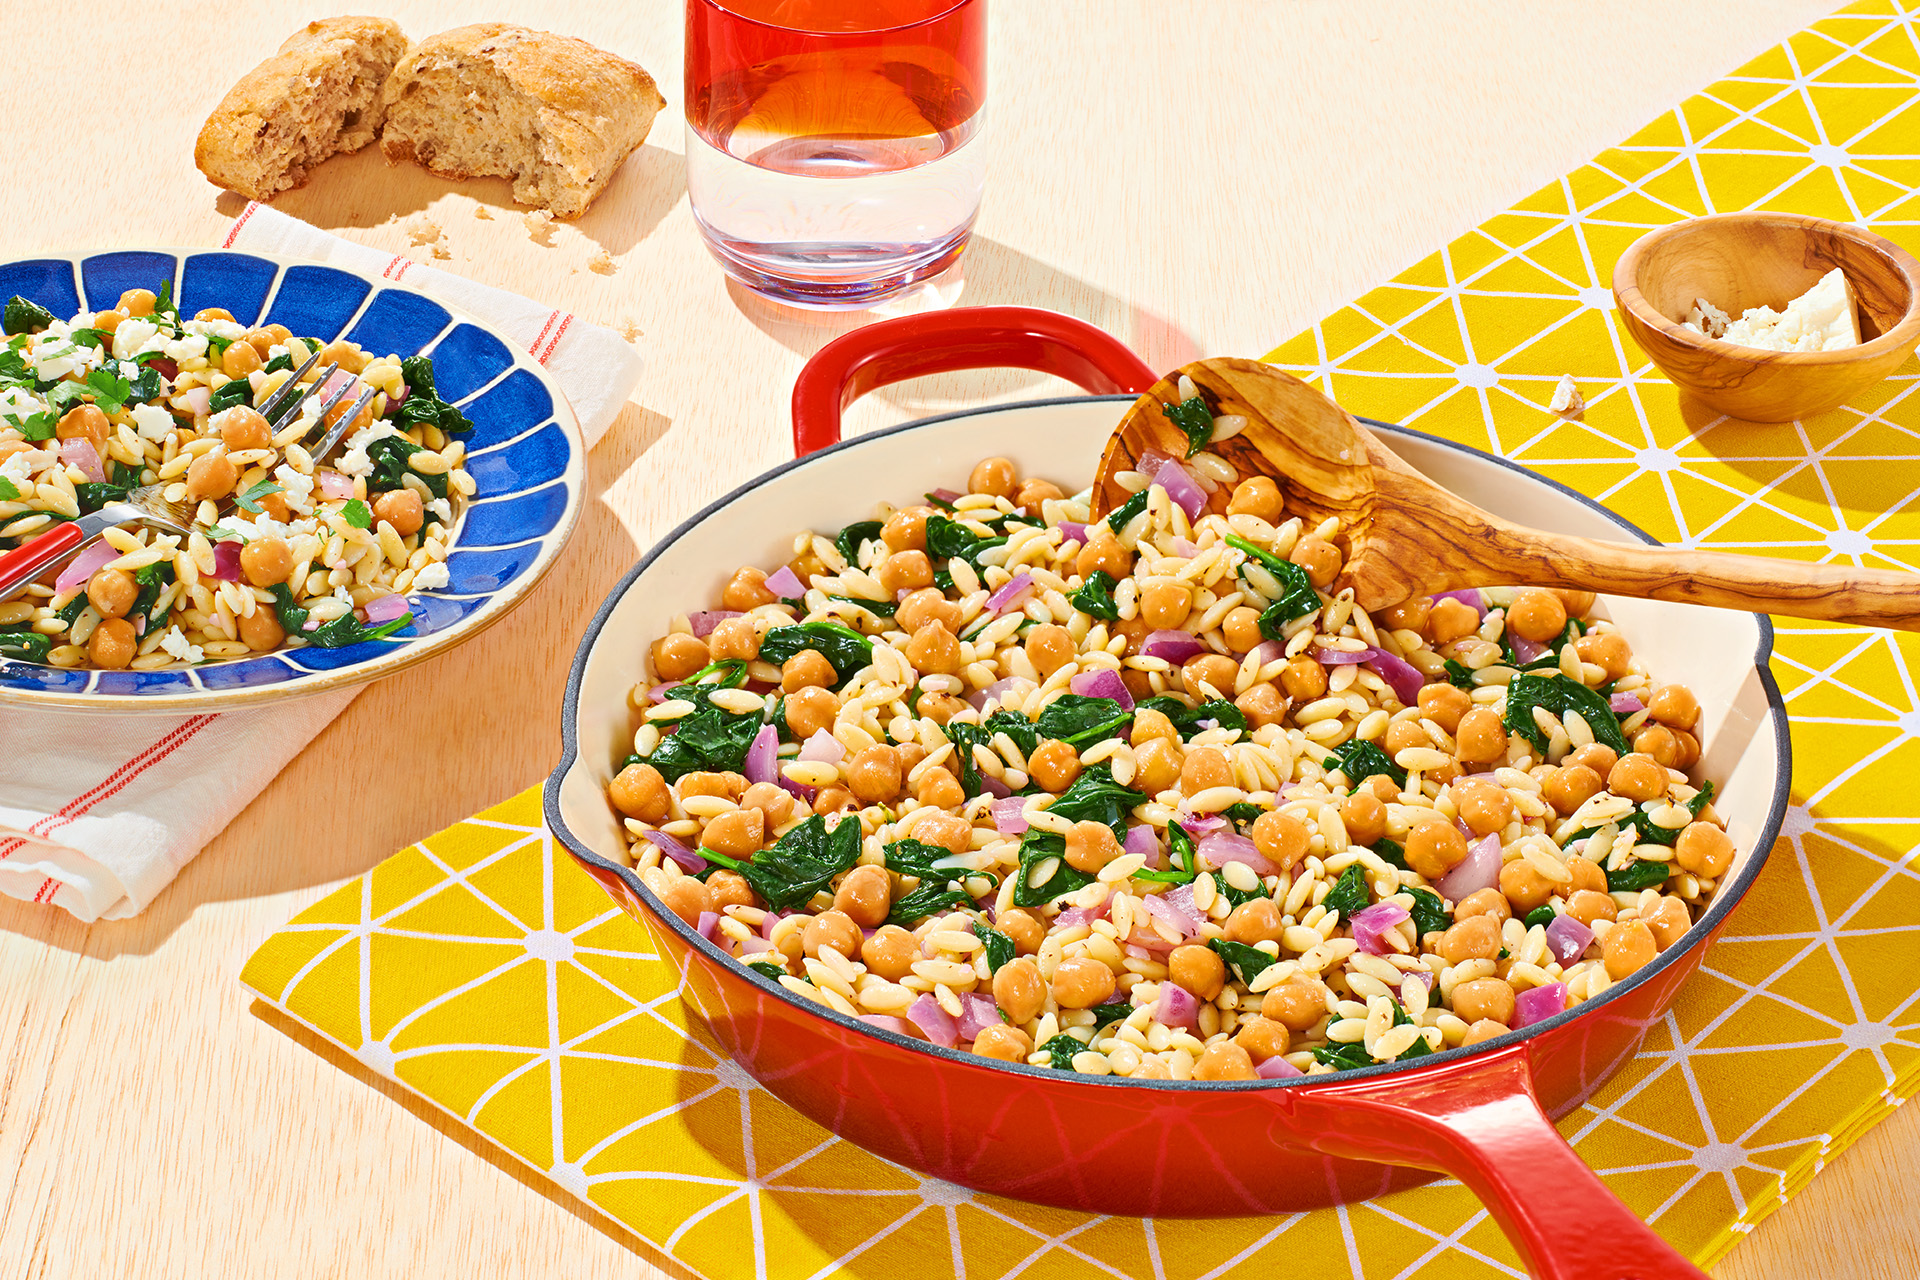 White enamel skillet filled with orzo, spinach and garbanzo beans, also known as chickpeas